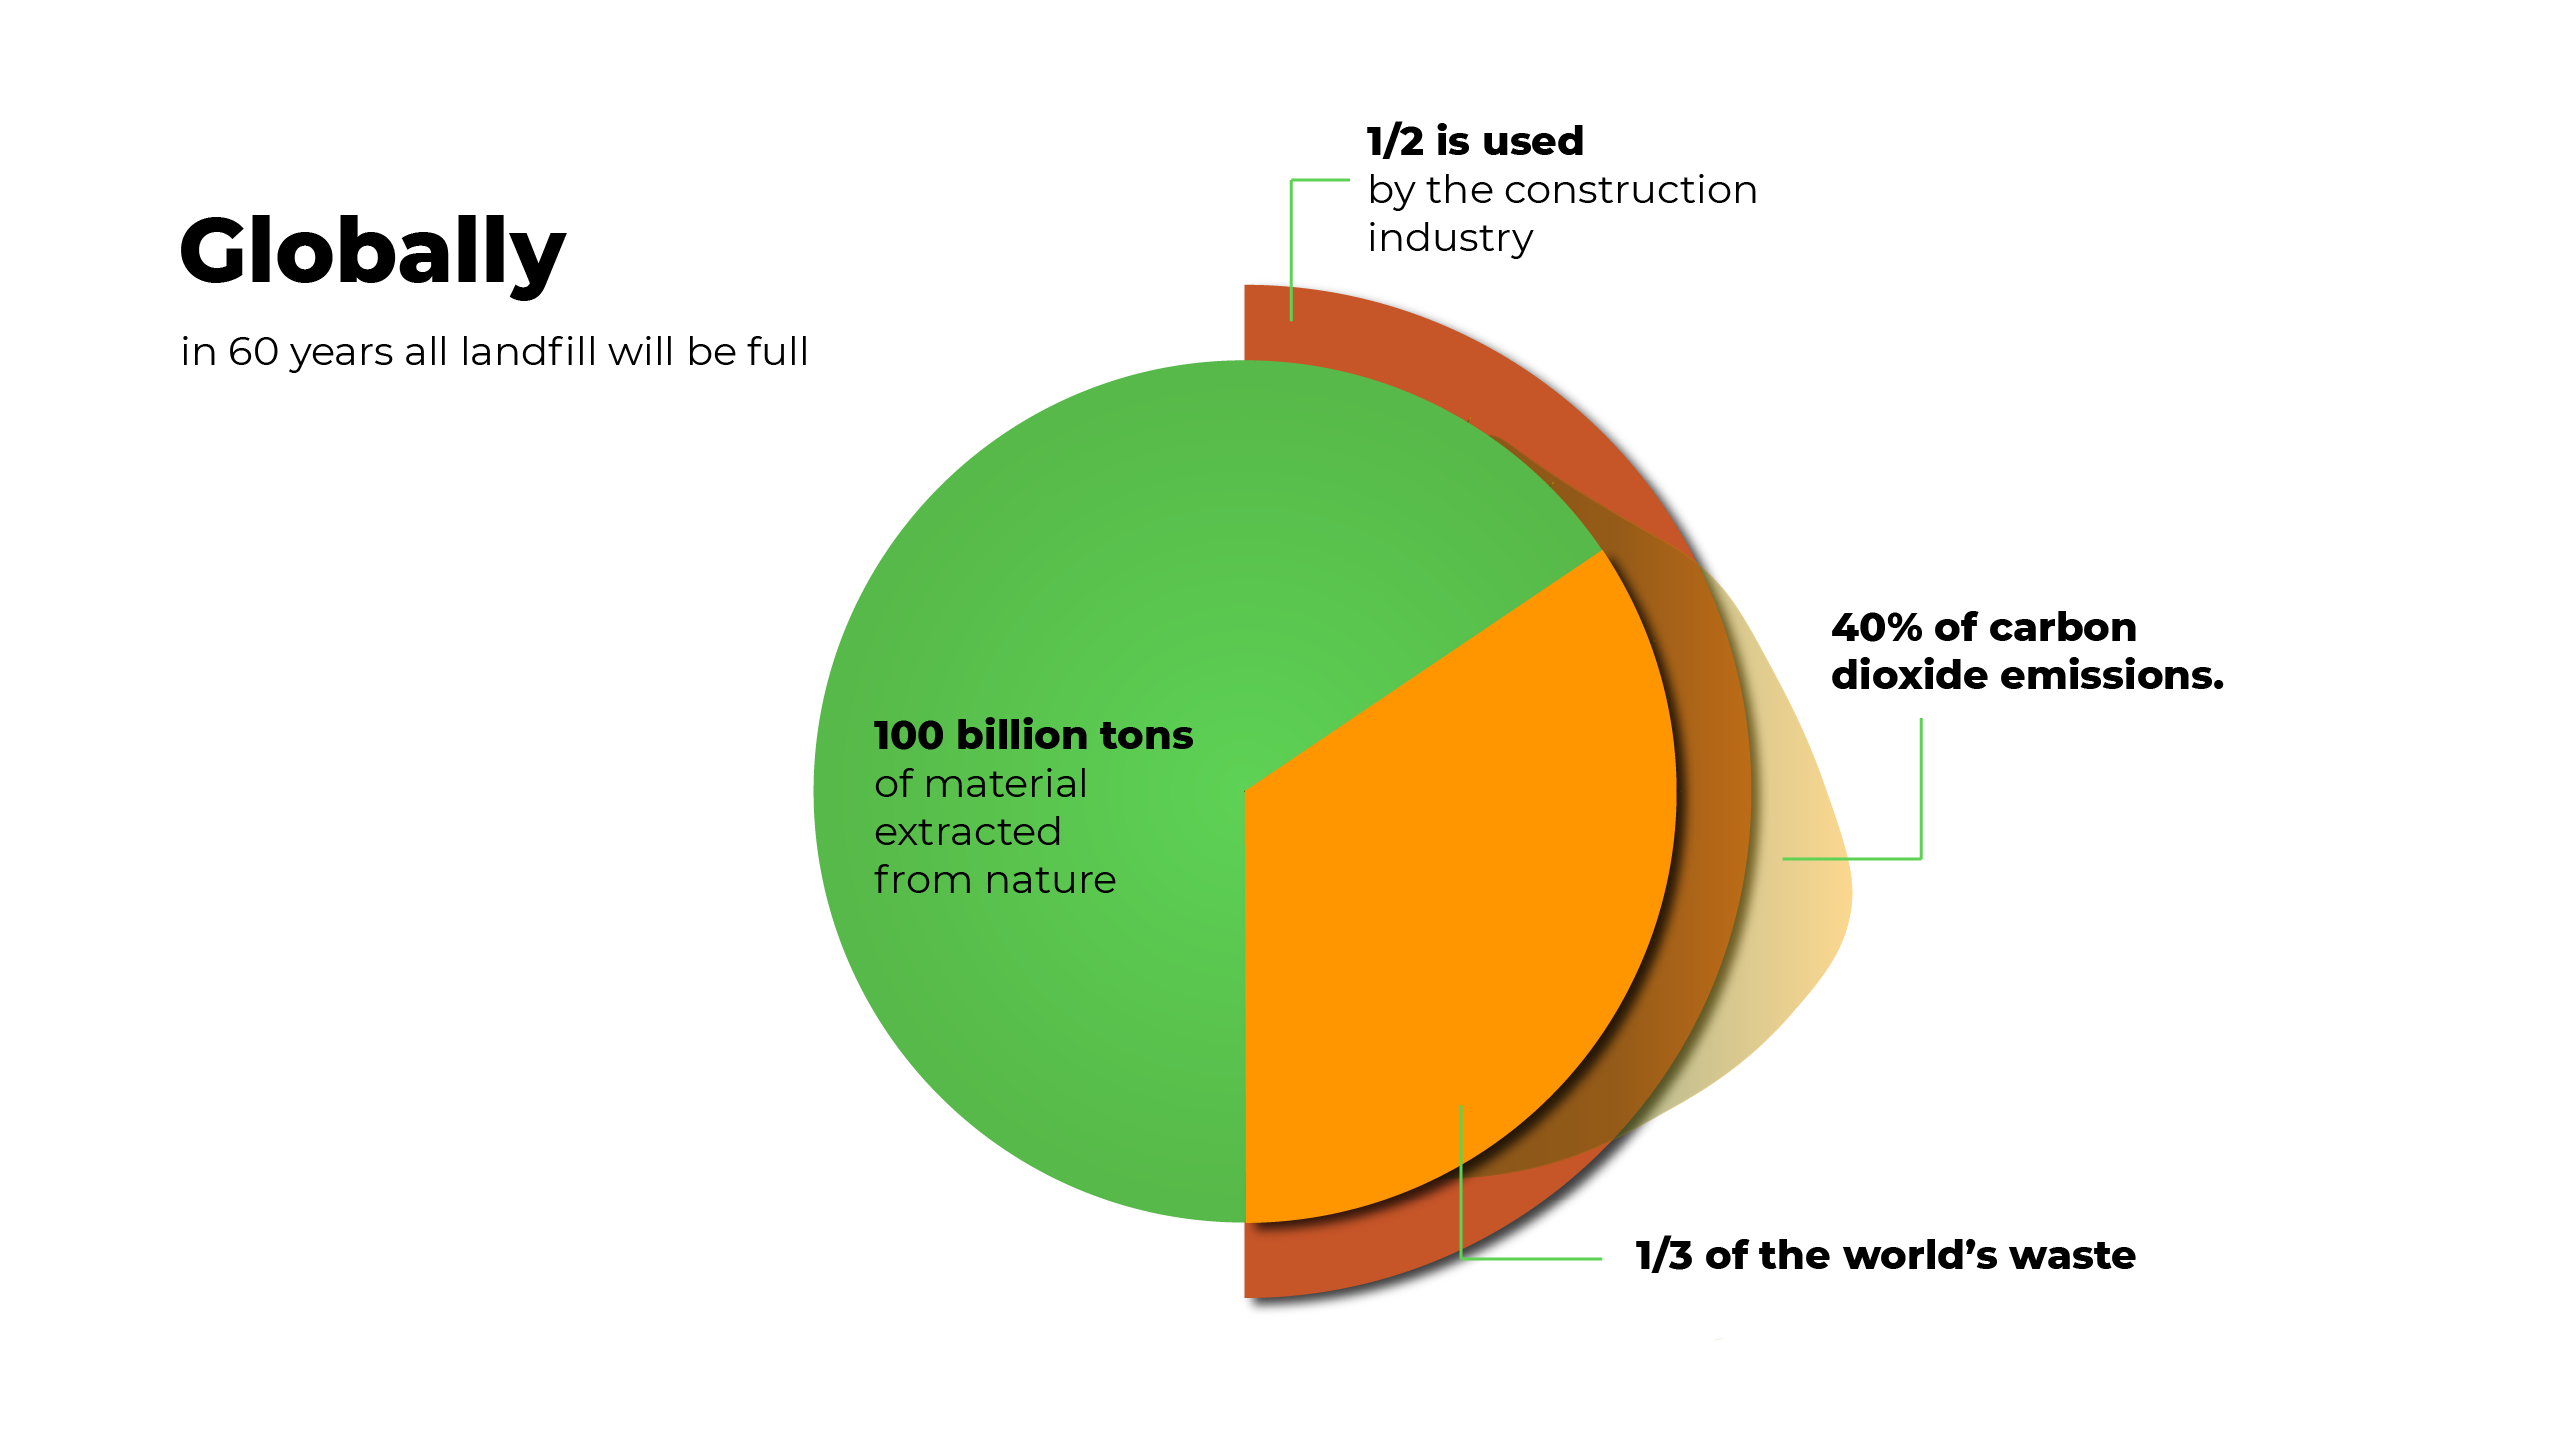 Global landfill growth pie chart